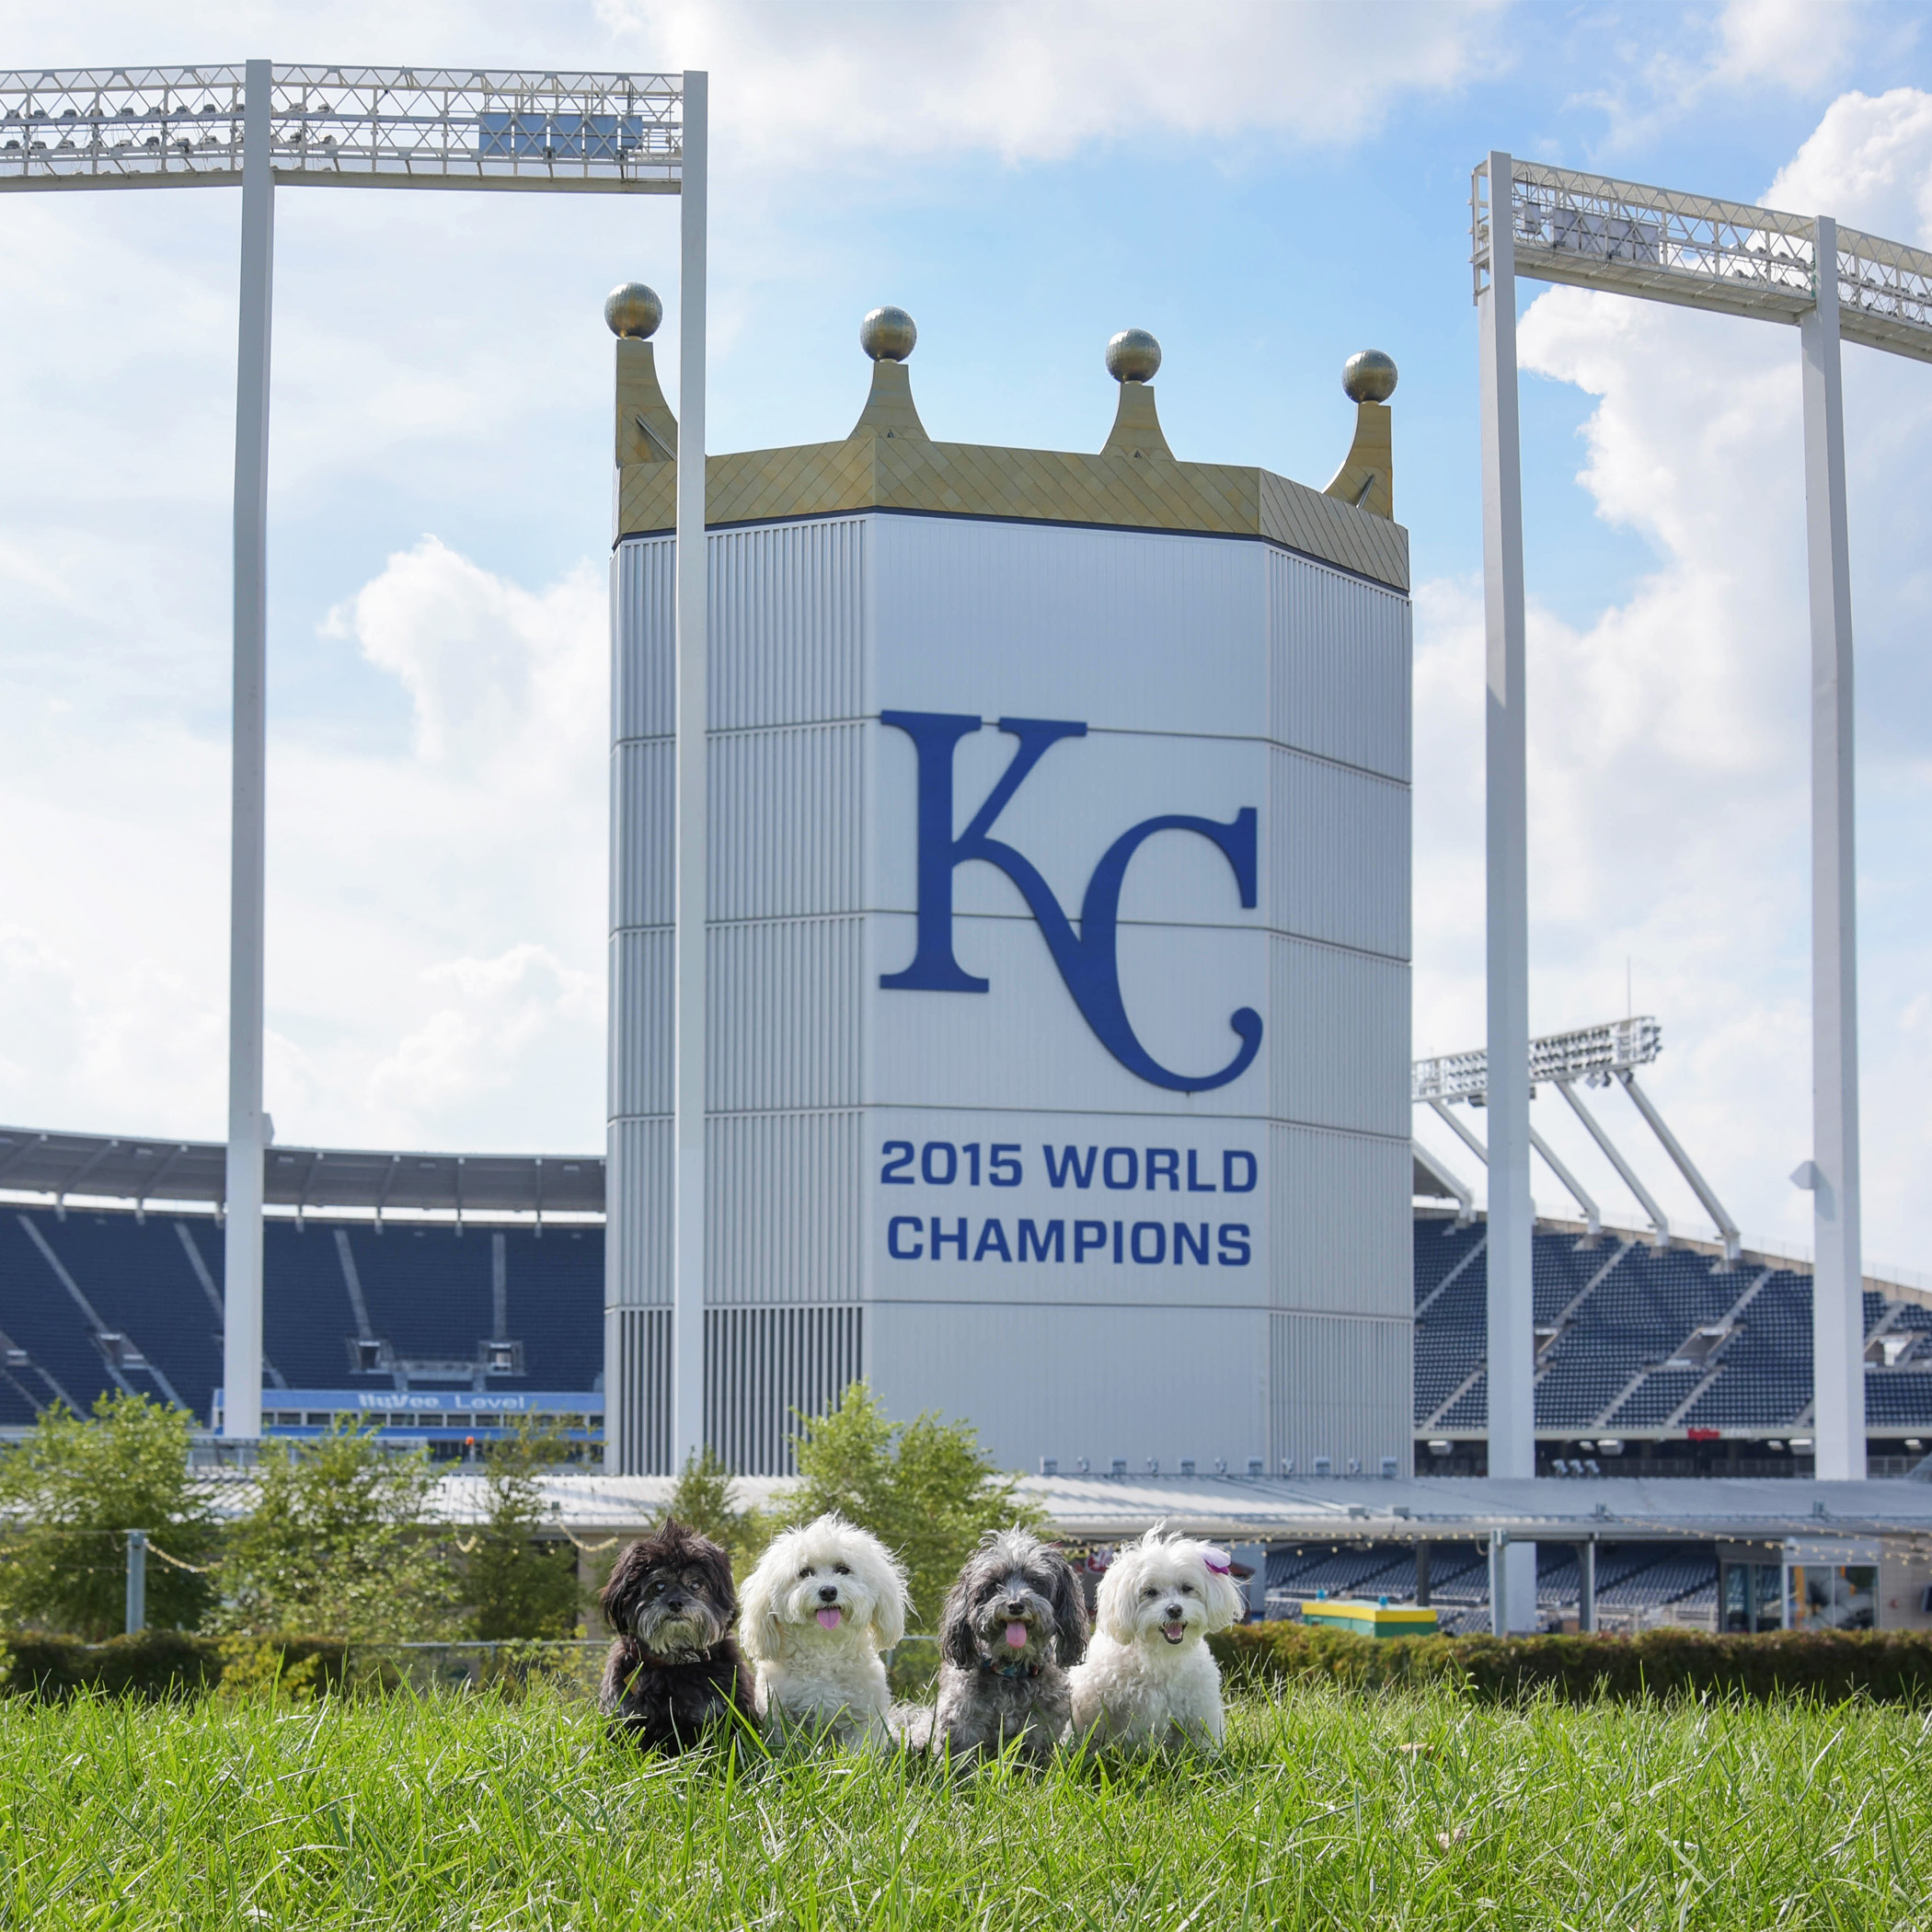  World Champs! We are so proud of the Royals and definitely had to make a stop at the K! The only bummer is that they wouldn’t let us on the grass…we just wanted to run the bases, we swear! 